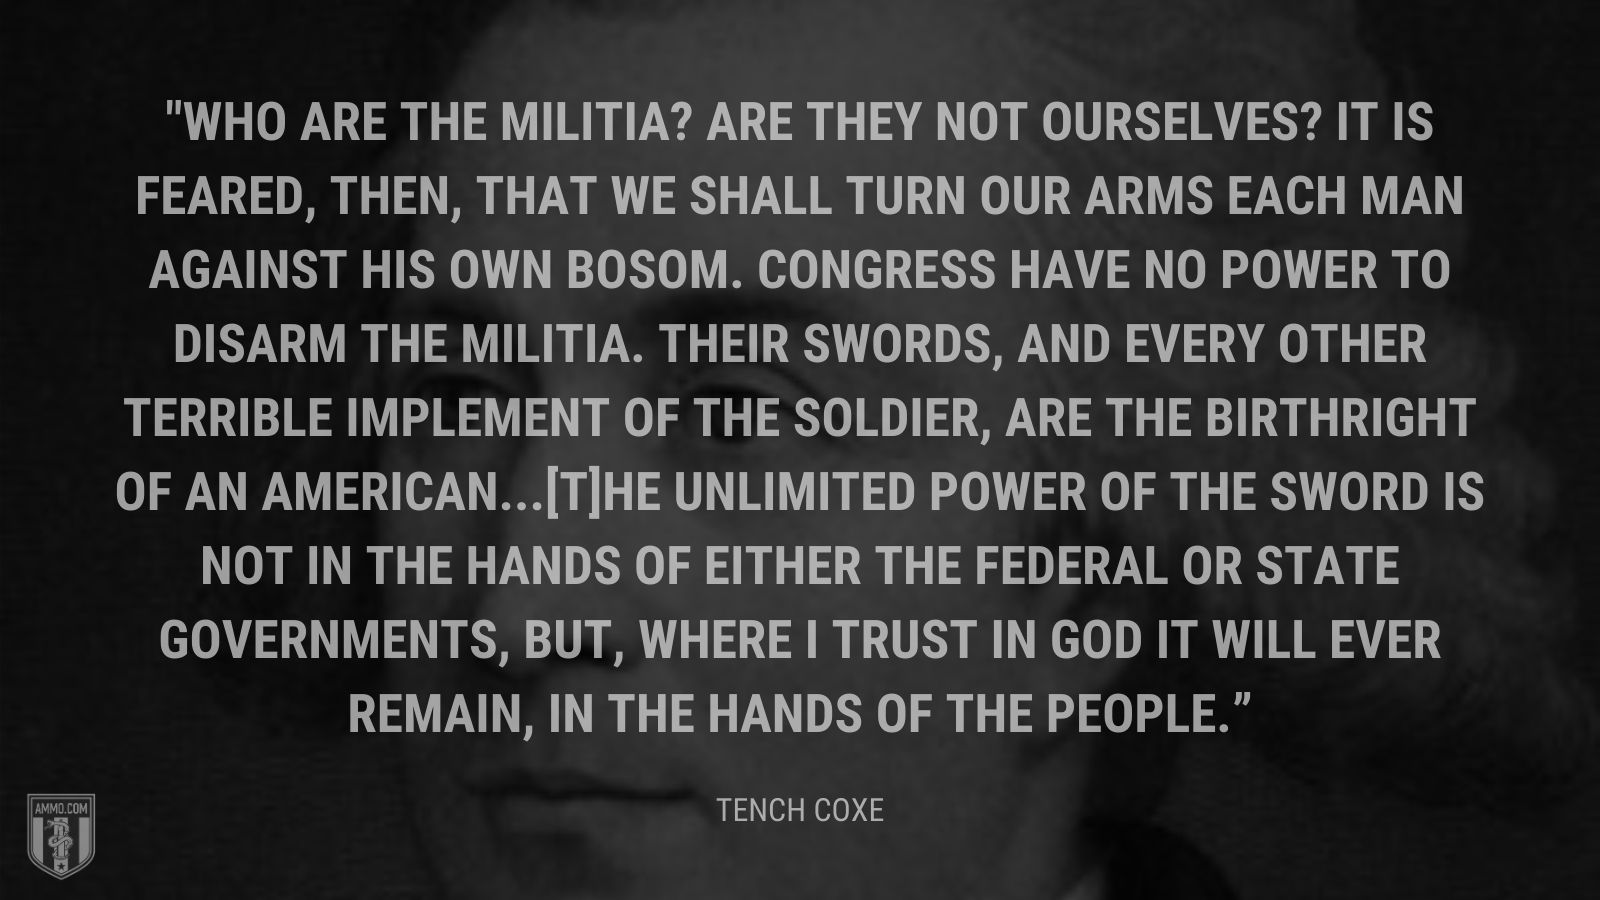 “Who are the militia? Are they not ourselves? It is feared, then, that we shall turn our arms each man against his own bosom. Congress have no power to disarm the militia. Their swords, and every other terrible implement of the soldier, are the birthright of an American...[T]he unlimited power of the sword is not in the hands of either the federal or state governments, but, where I trust in God it will ever remain, in the hands of the people.” - Tench Coxe